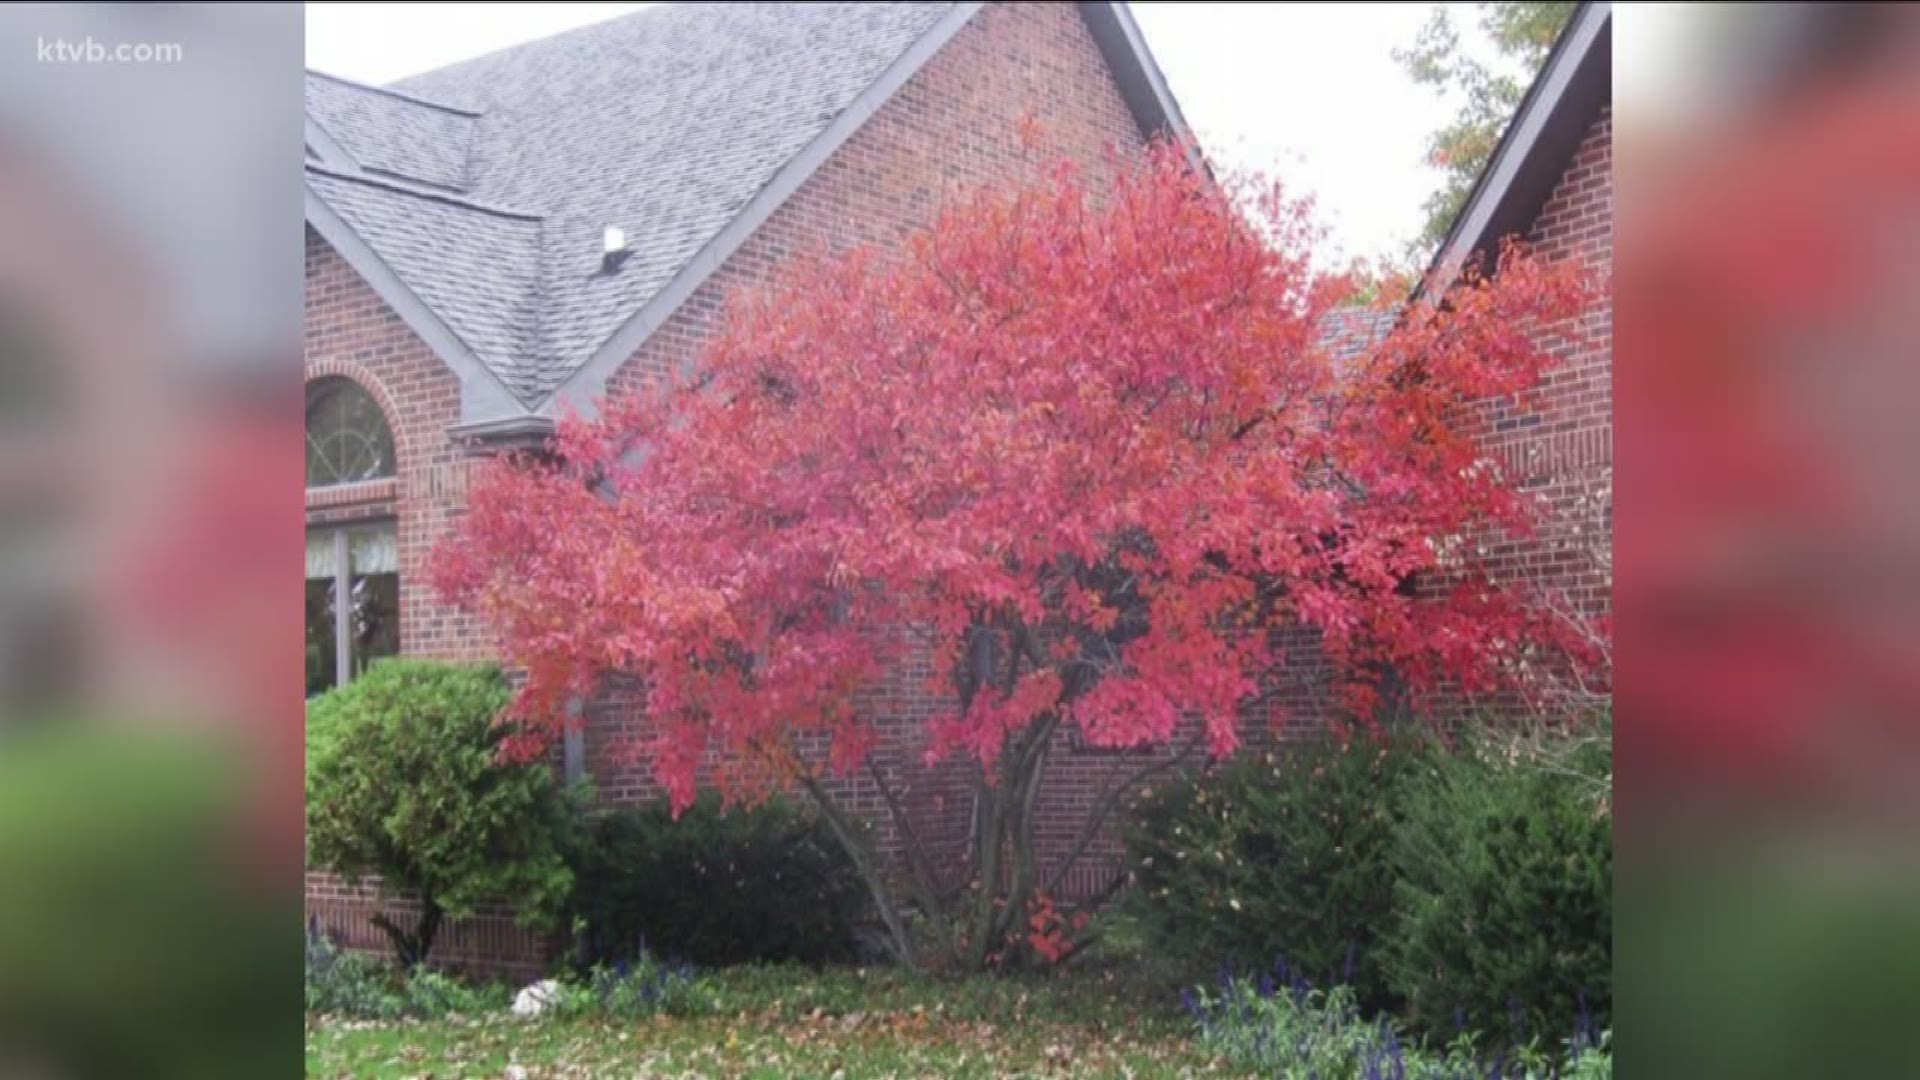 Jim Duthie takes us to Zamzows to learn which trees you should plant to get spectacular fall color.